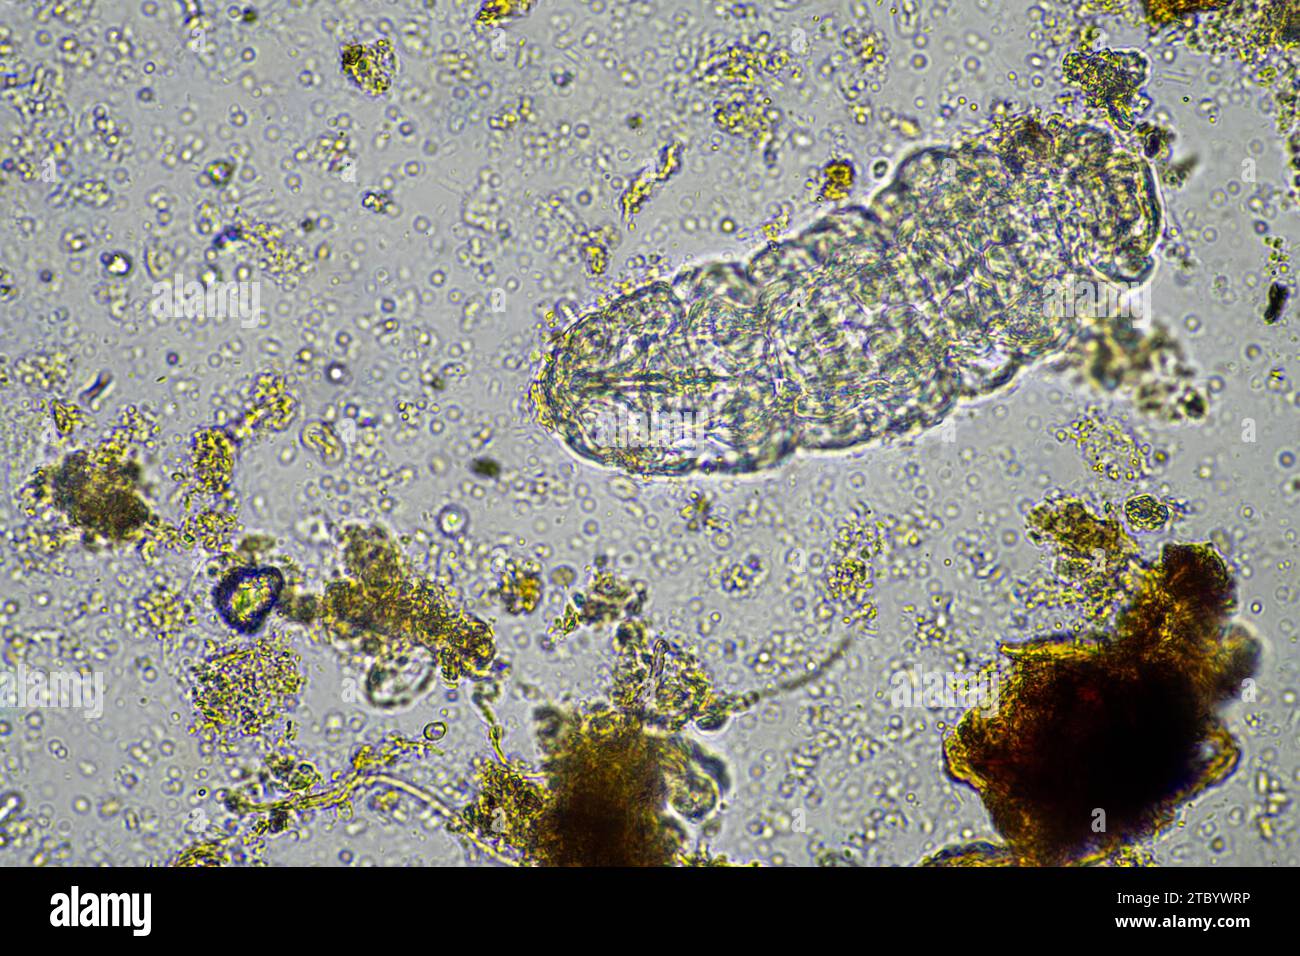 microorganisms and a tardigrade in a soil sample on a farm Stock Photo